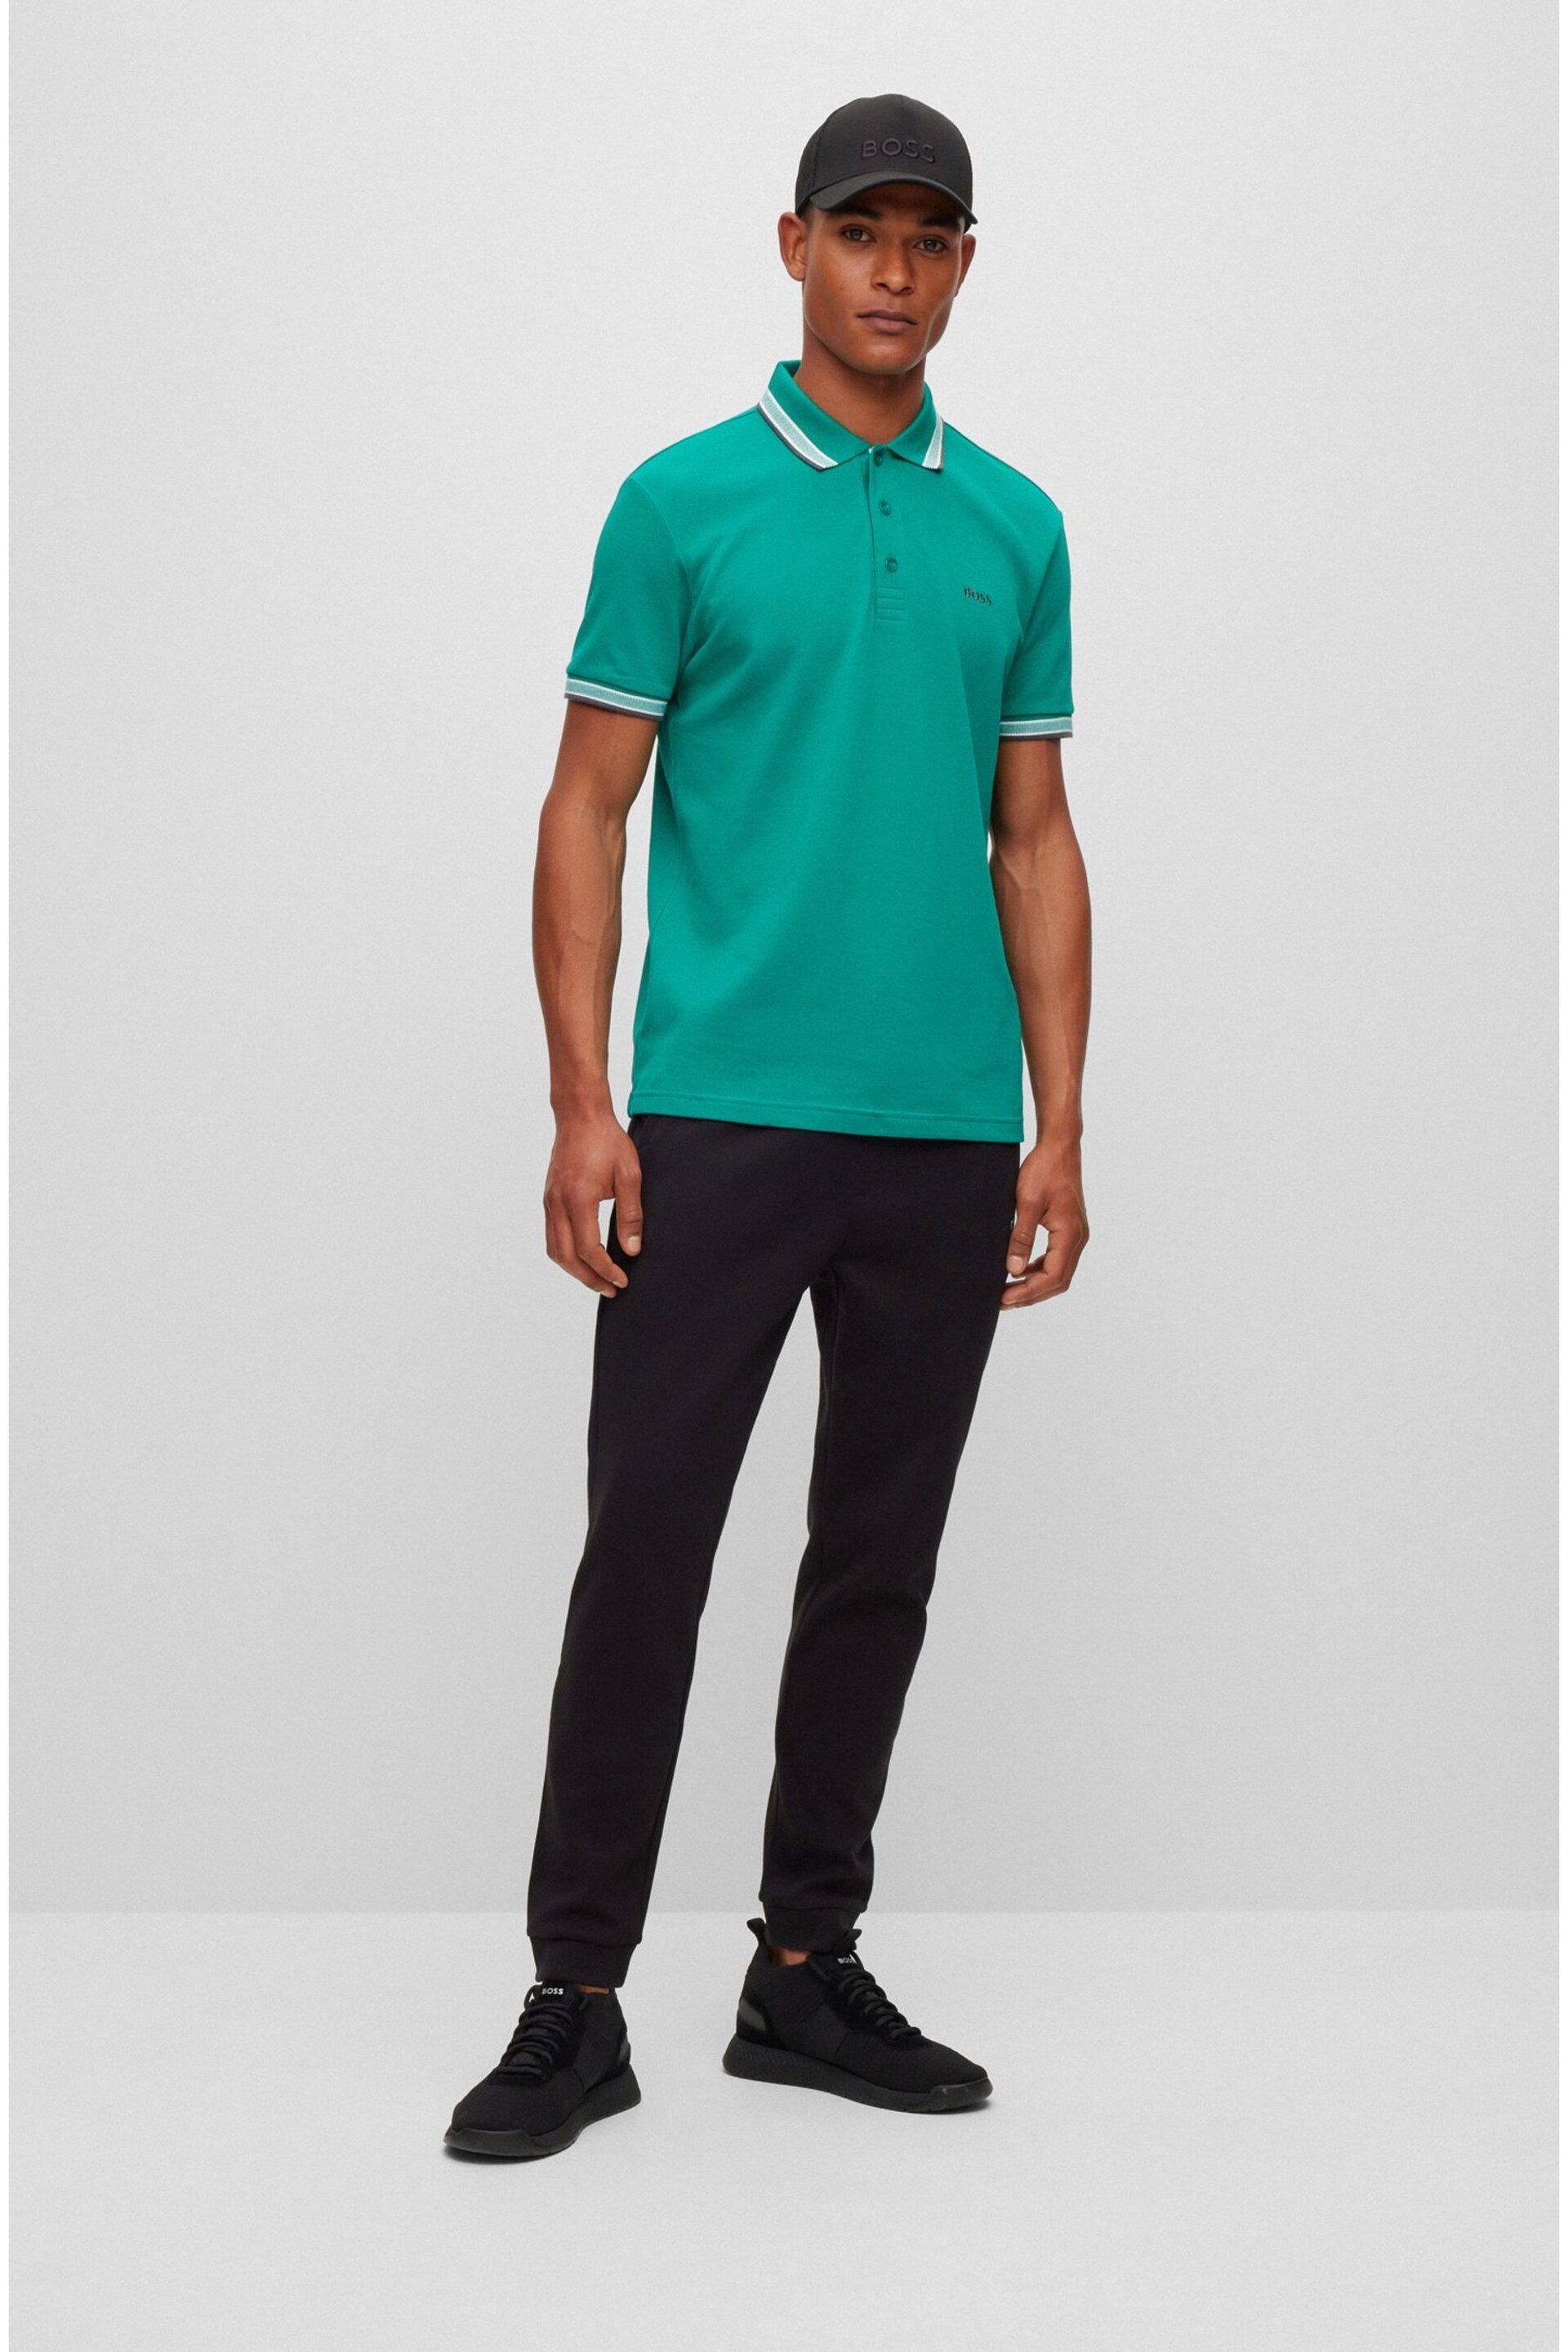 BOSS Green/Green Tipping Paddy Polo Shirt - Image 3 of 5